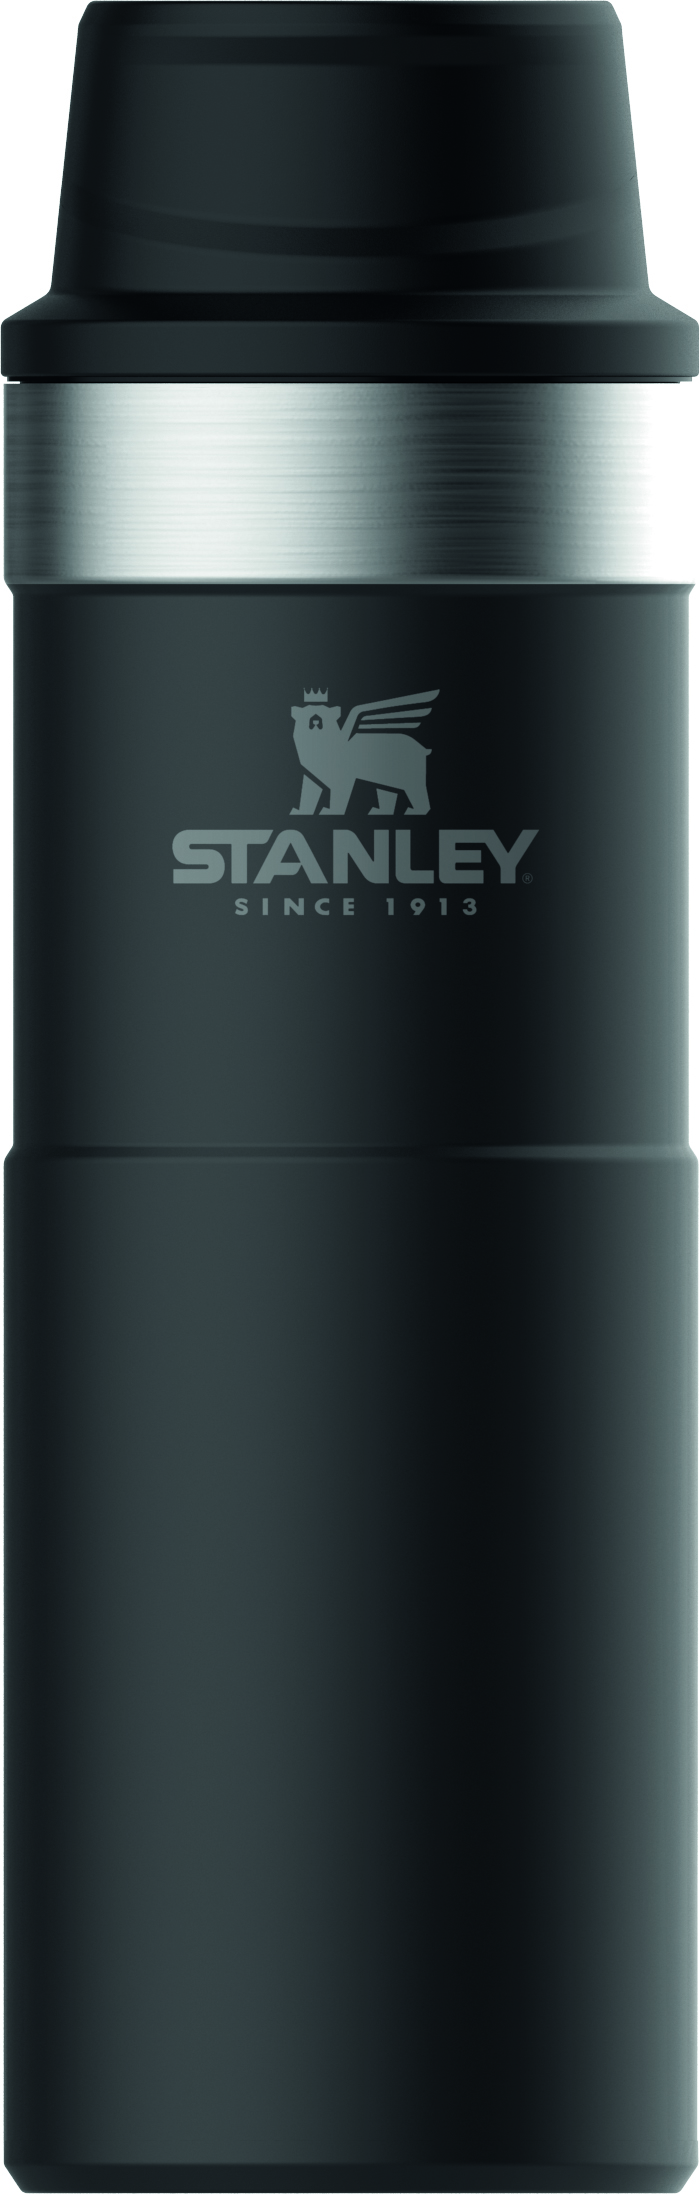 https://promotionway.com/data/shopproducts/1864/stanley-classic-trigger-action-travel-mug-0-47l.jpg